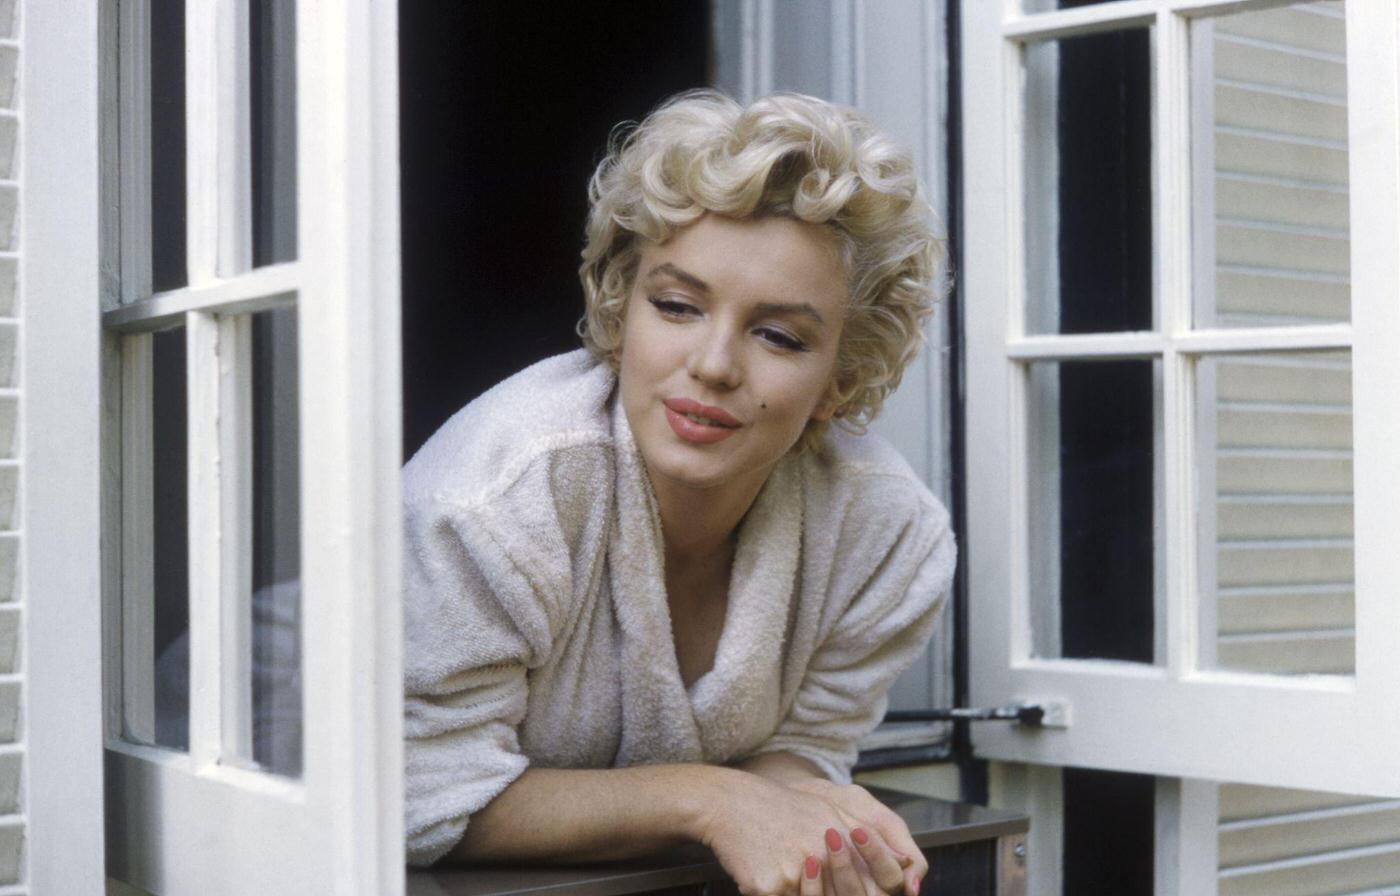 Marilyn Monroe leaning out of a window in her bathrobe in 1954 during the filming of "The Seven Year Itch" in New York